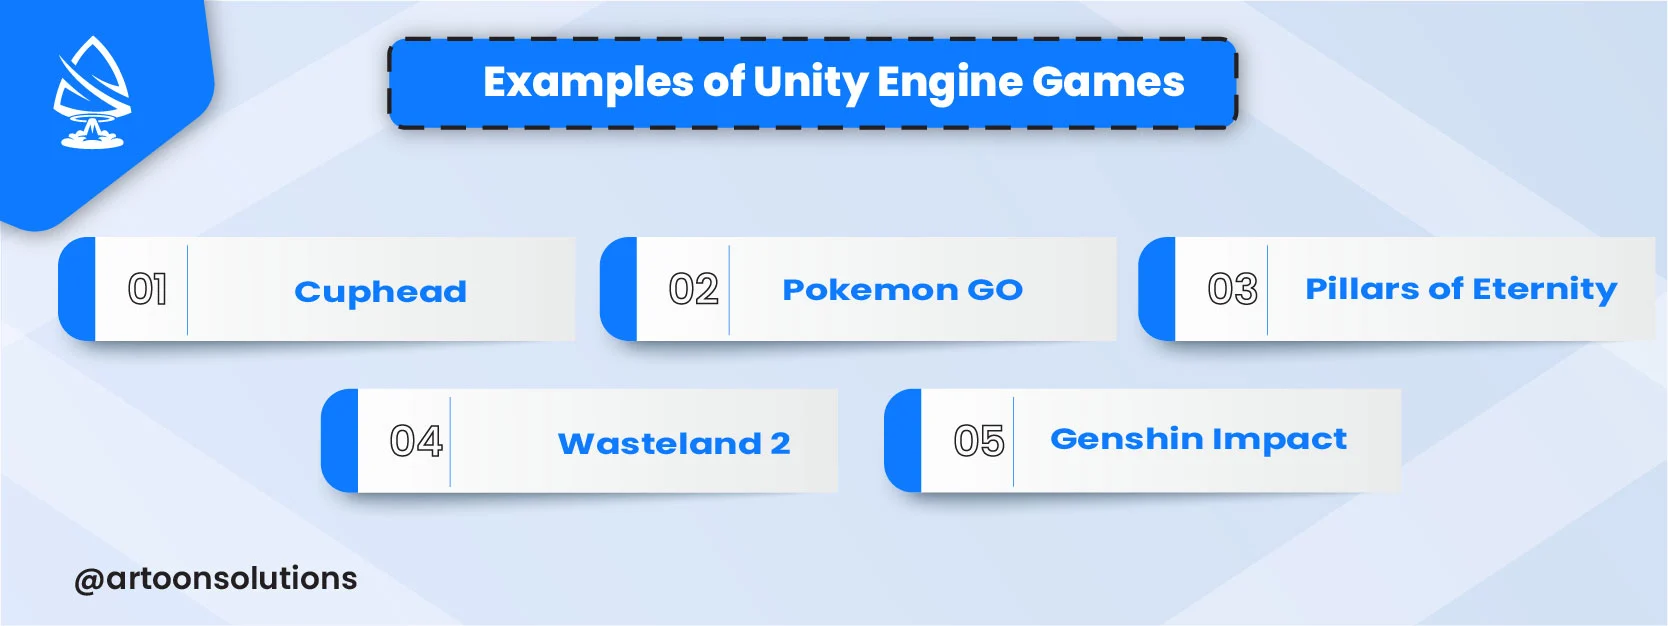 Examples of Unity Engine Games 